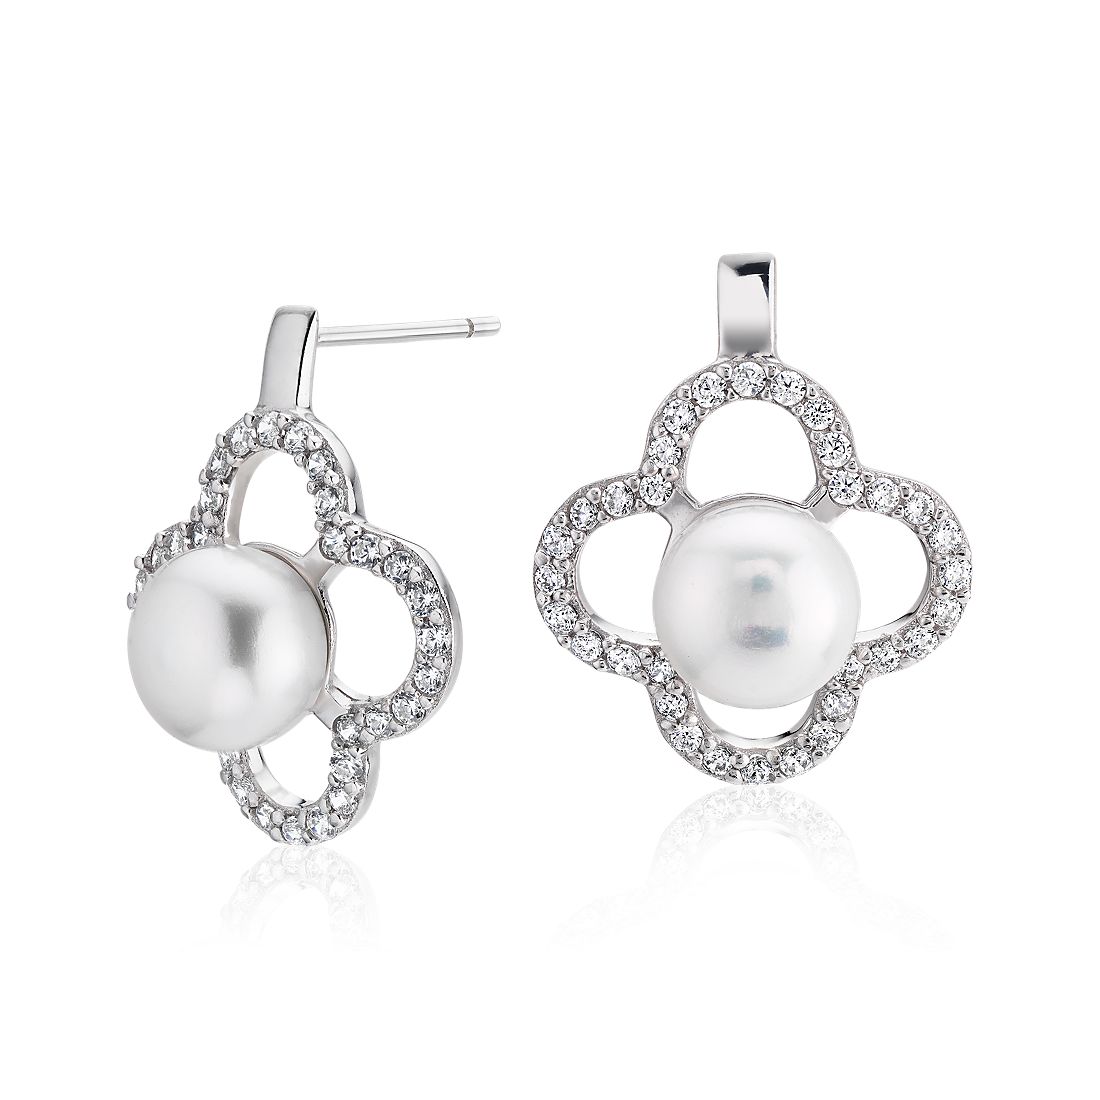 Clover and Cultured Freshwater Pearl Earrings with White Topaz in Sterling Silver (8-9mm)